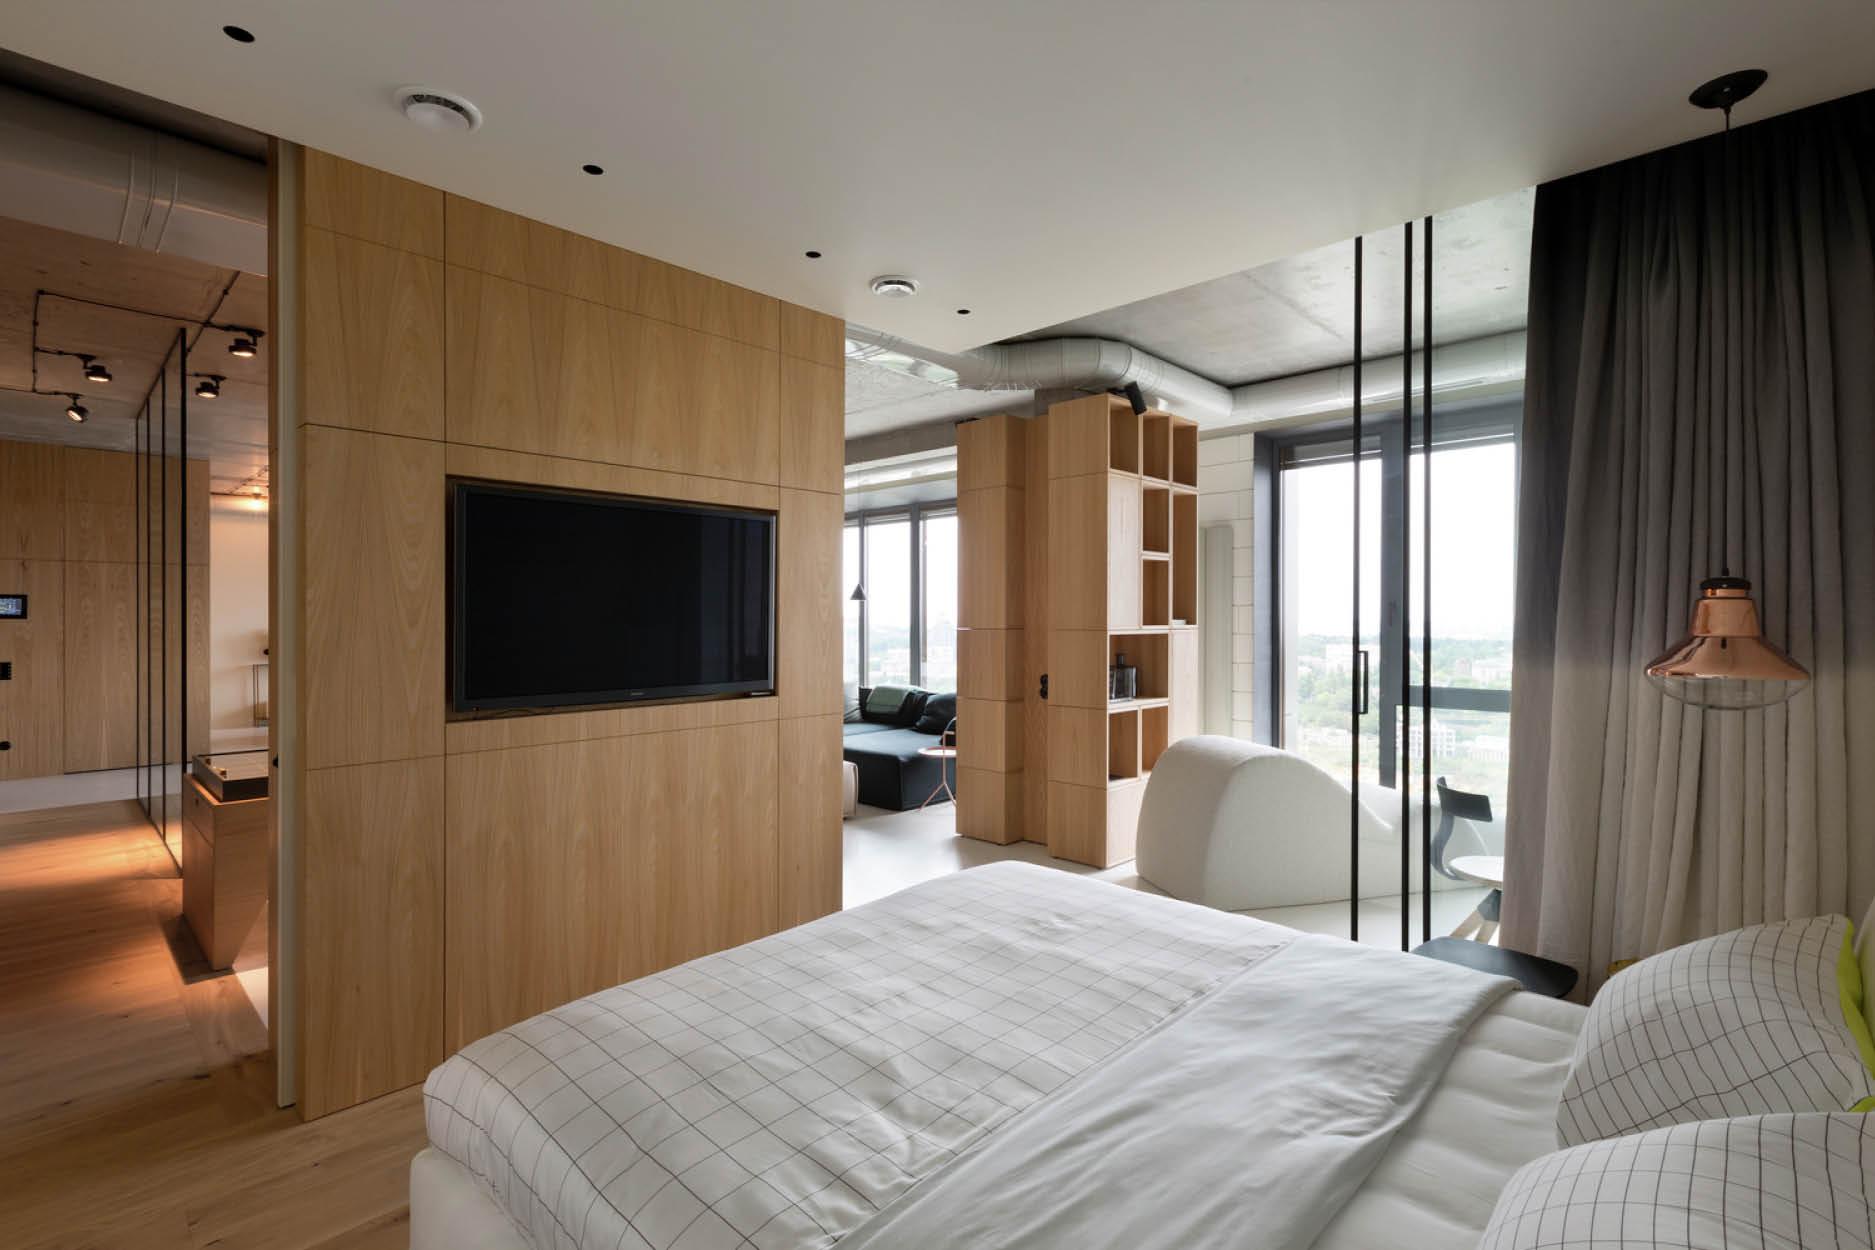 This Modern Bachelor Pad is Fitted with Smart Home Technology